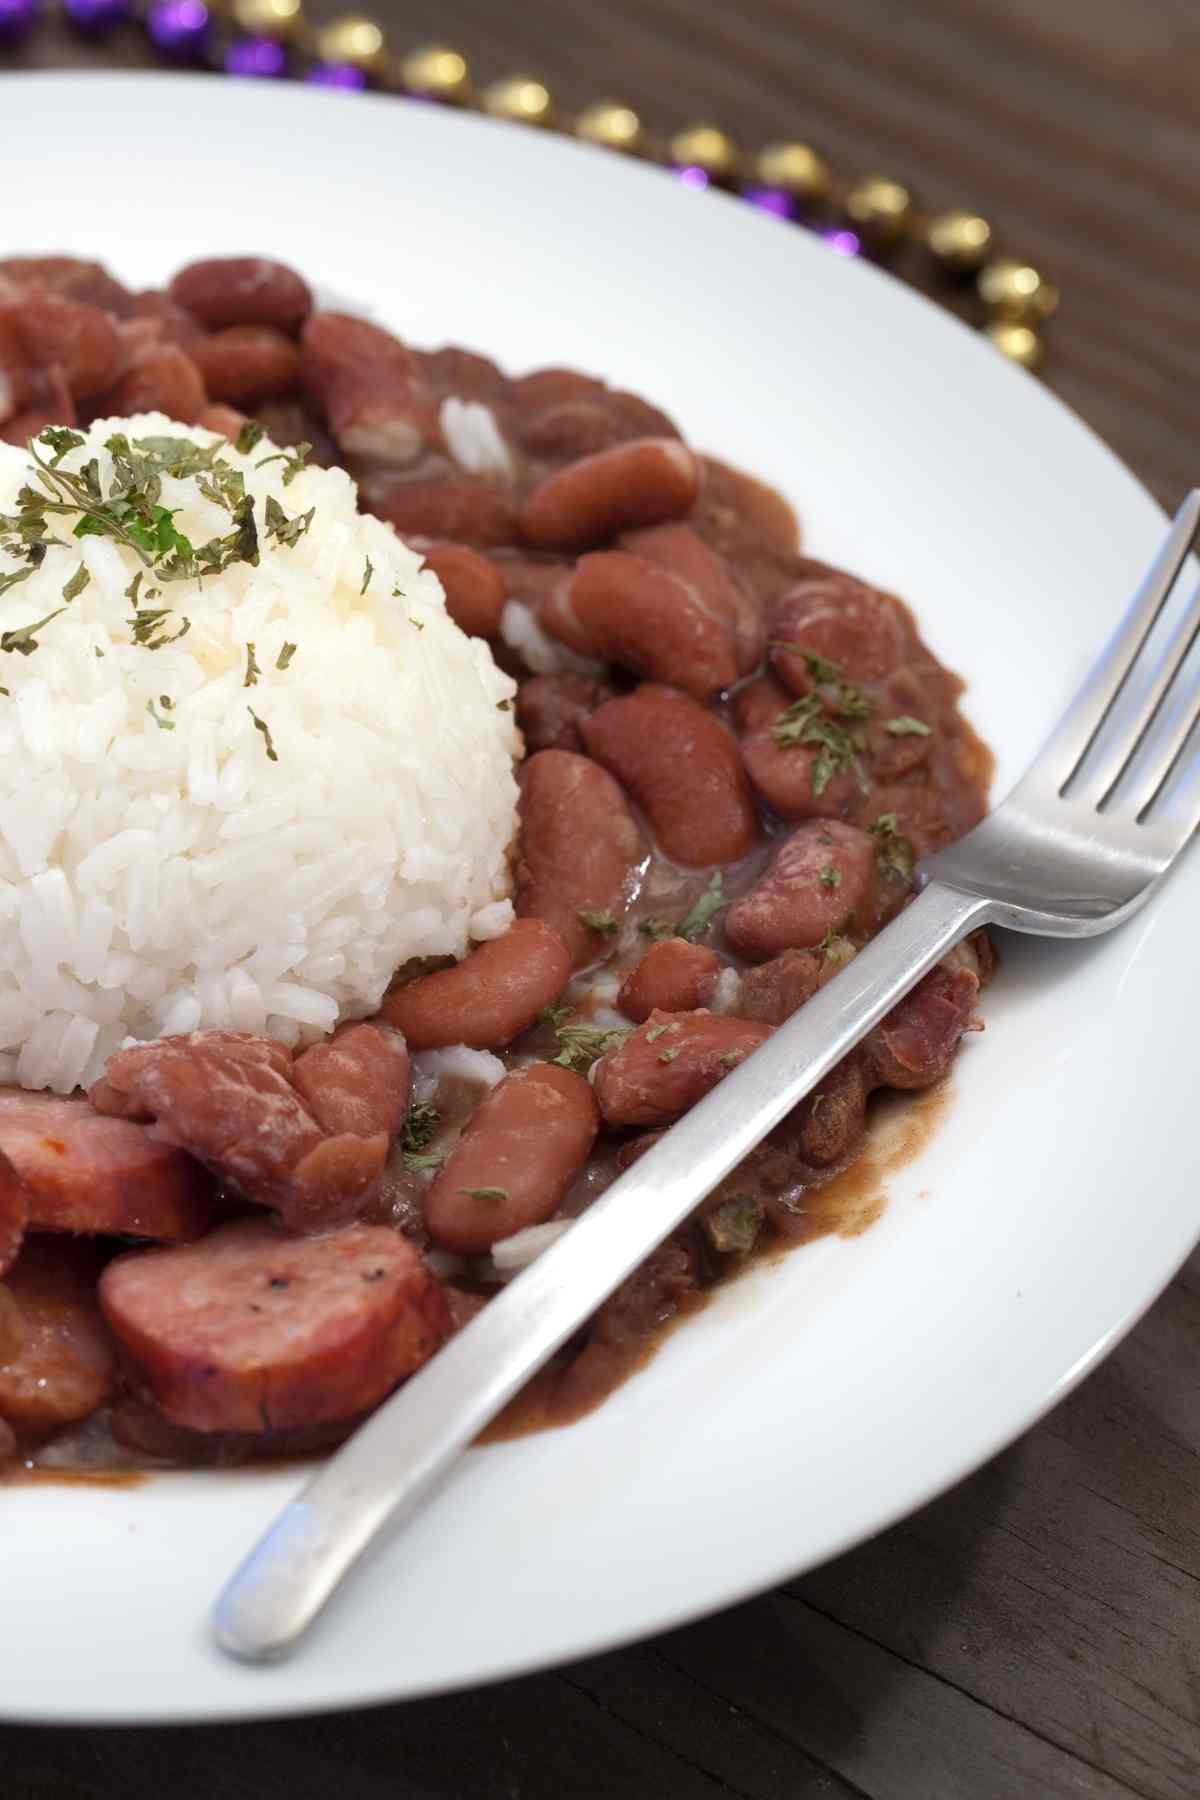 If you enjoy the flavor of the red beans and rice at Popeyes, give this copycat recipe a try. It includes step-by-step instructions on how to recreate this tasty dish in your own home!